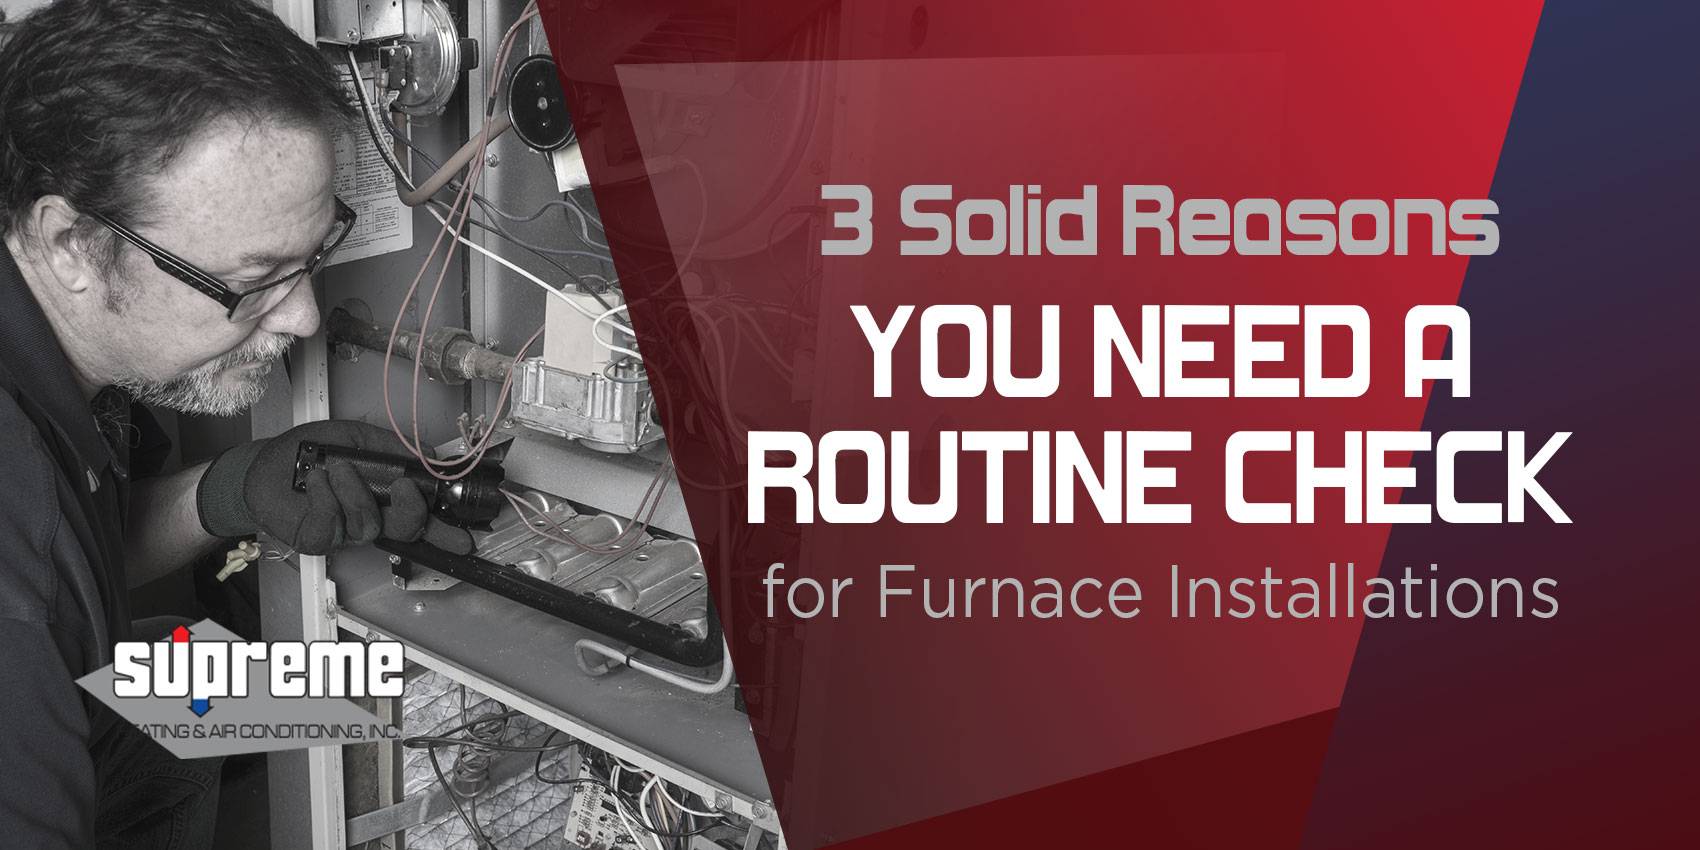 3 Solid Reasons You Need a Routine Check for Furnace Installations